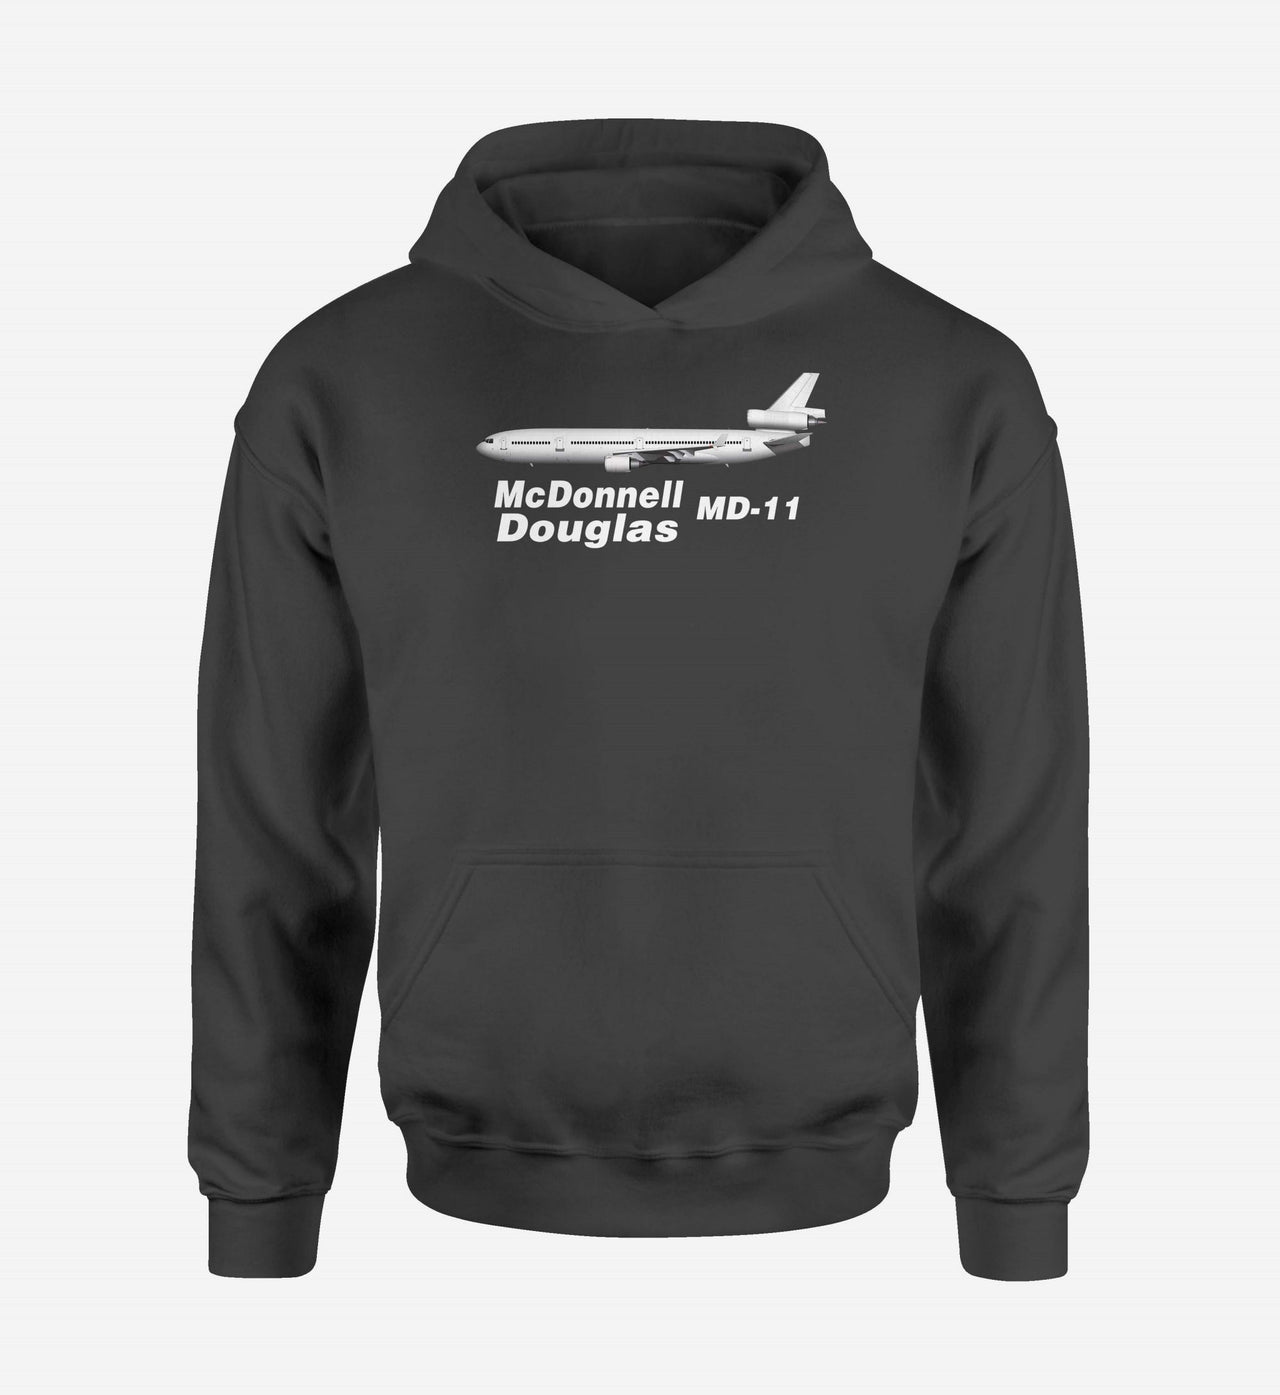 The McDonnell Douglas MD-11 Designed Hoodies